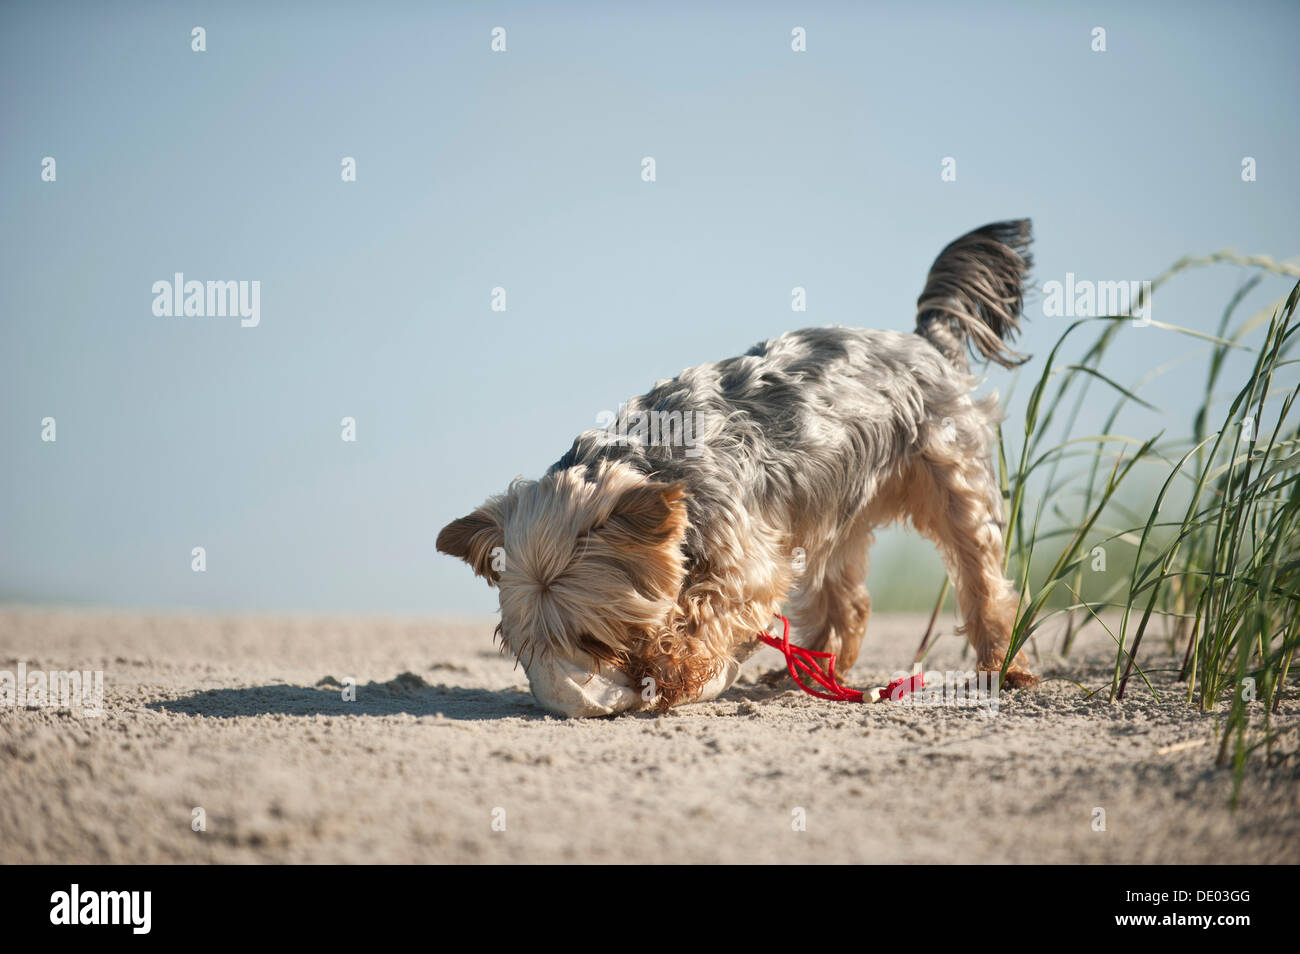 Yorkshire Terrier dog fetching a feed bag Stock Photo